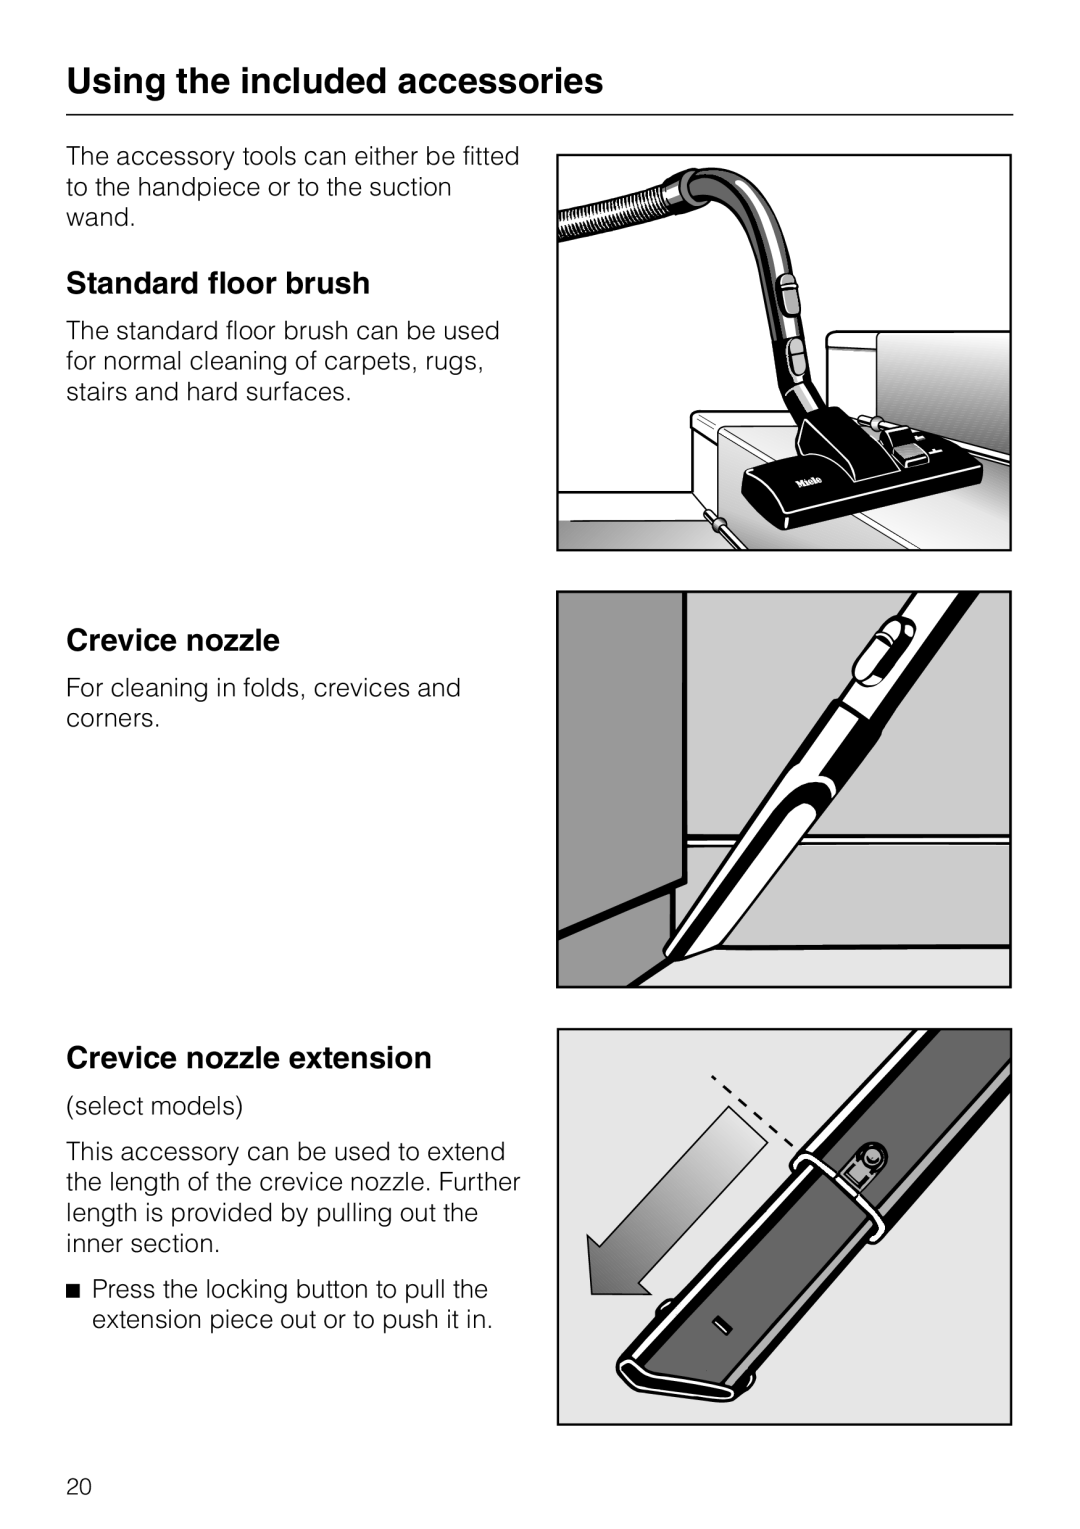 Miele S 600, S 648, S 548, S 500 Using the included accessories, Standard floor brush, Crevice nozzle extension 